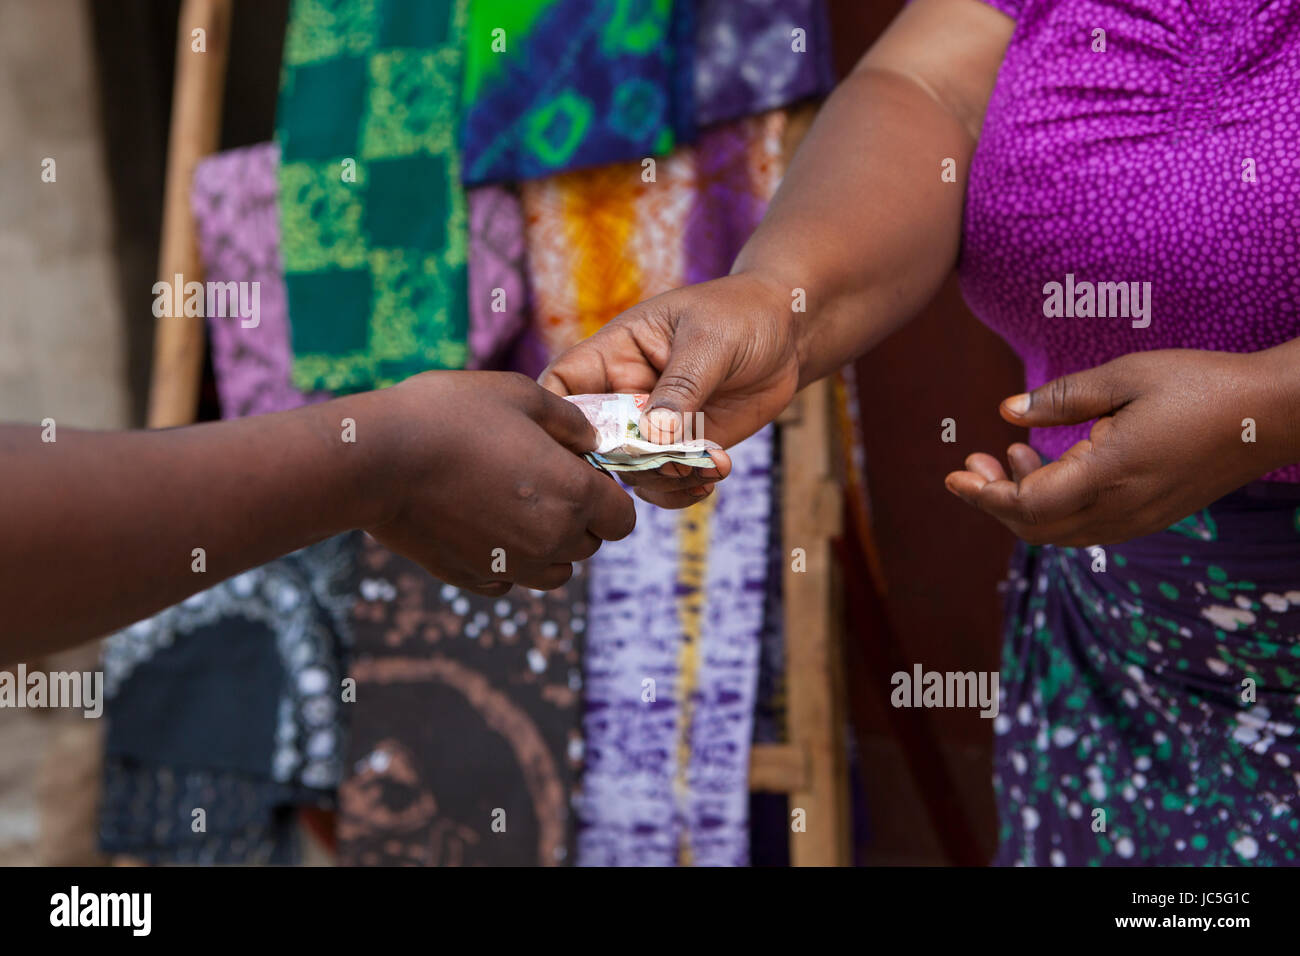 Female business woman in her shop, Tanzania, Africa Stock Photo